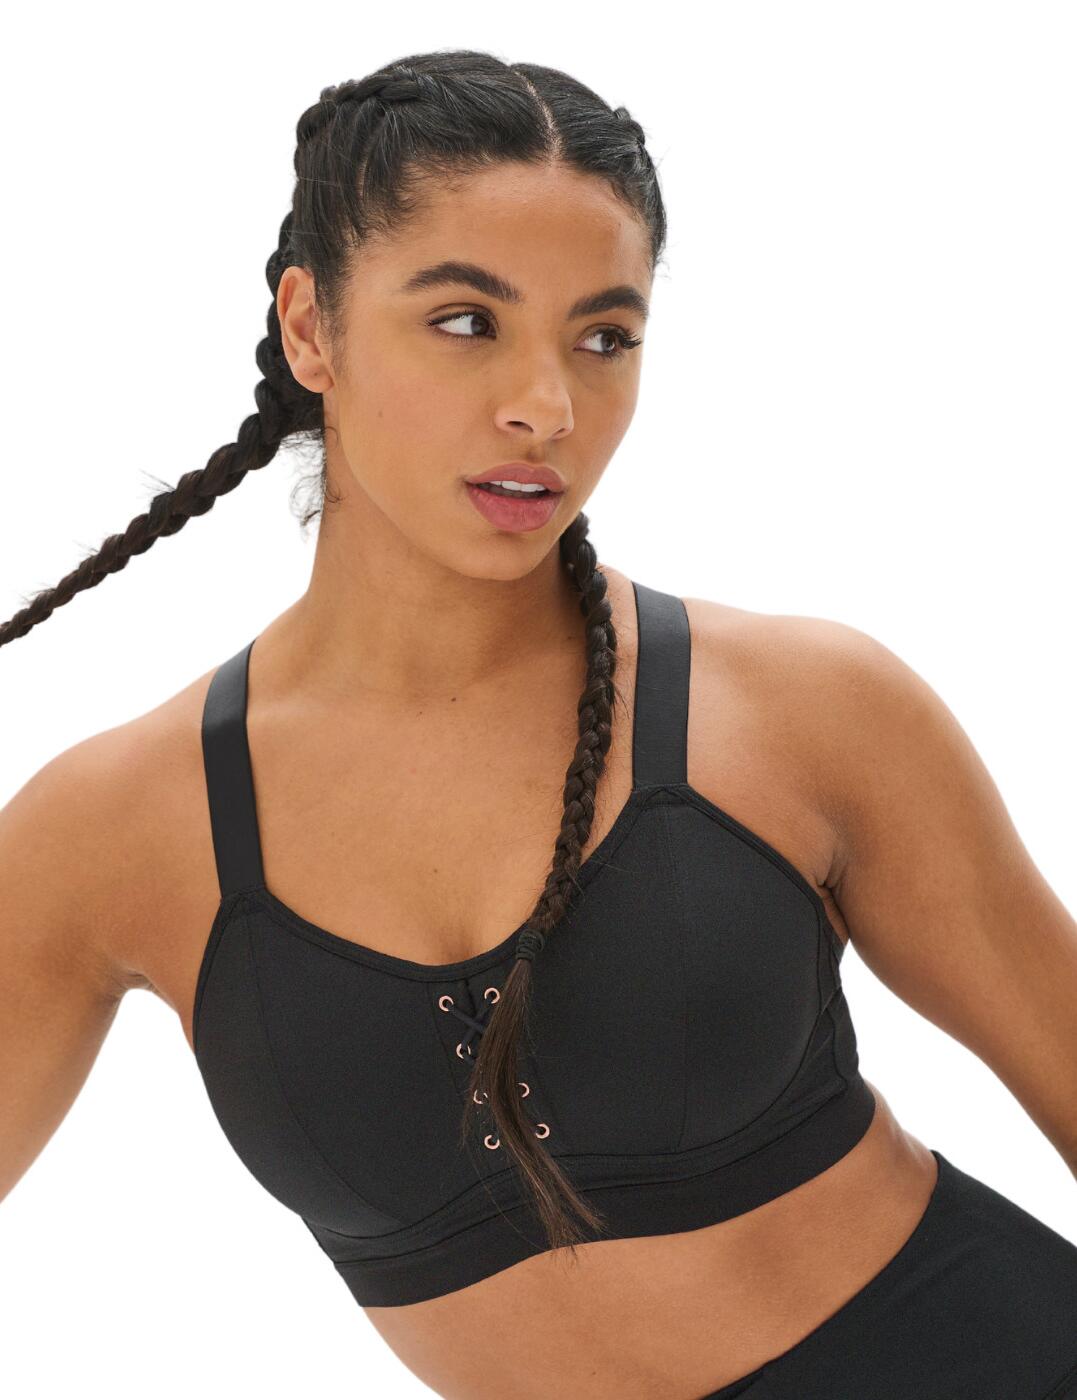 Pour Moi Energy Aspire Underwired Sports Bra - Belle Lingerie  Pour Moi  Energy Aspire Underwired Padded Sports Bra - Belle Lingerie